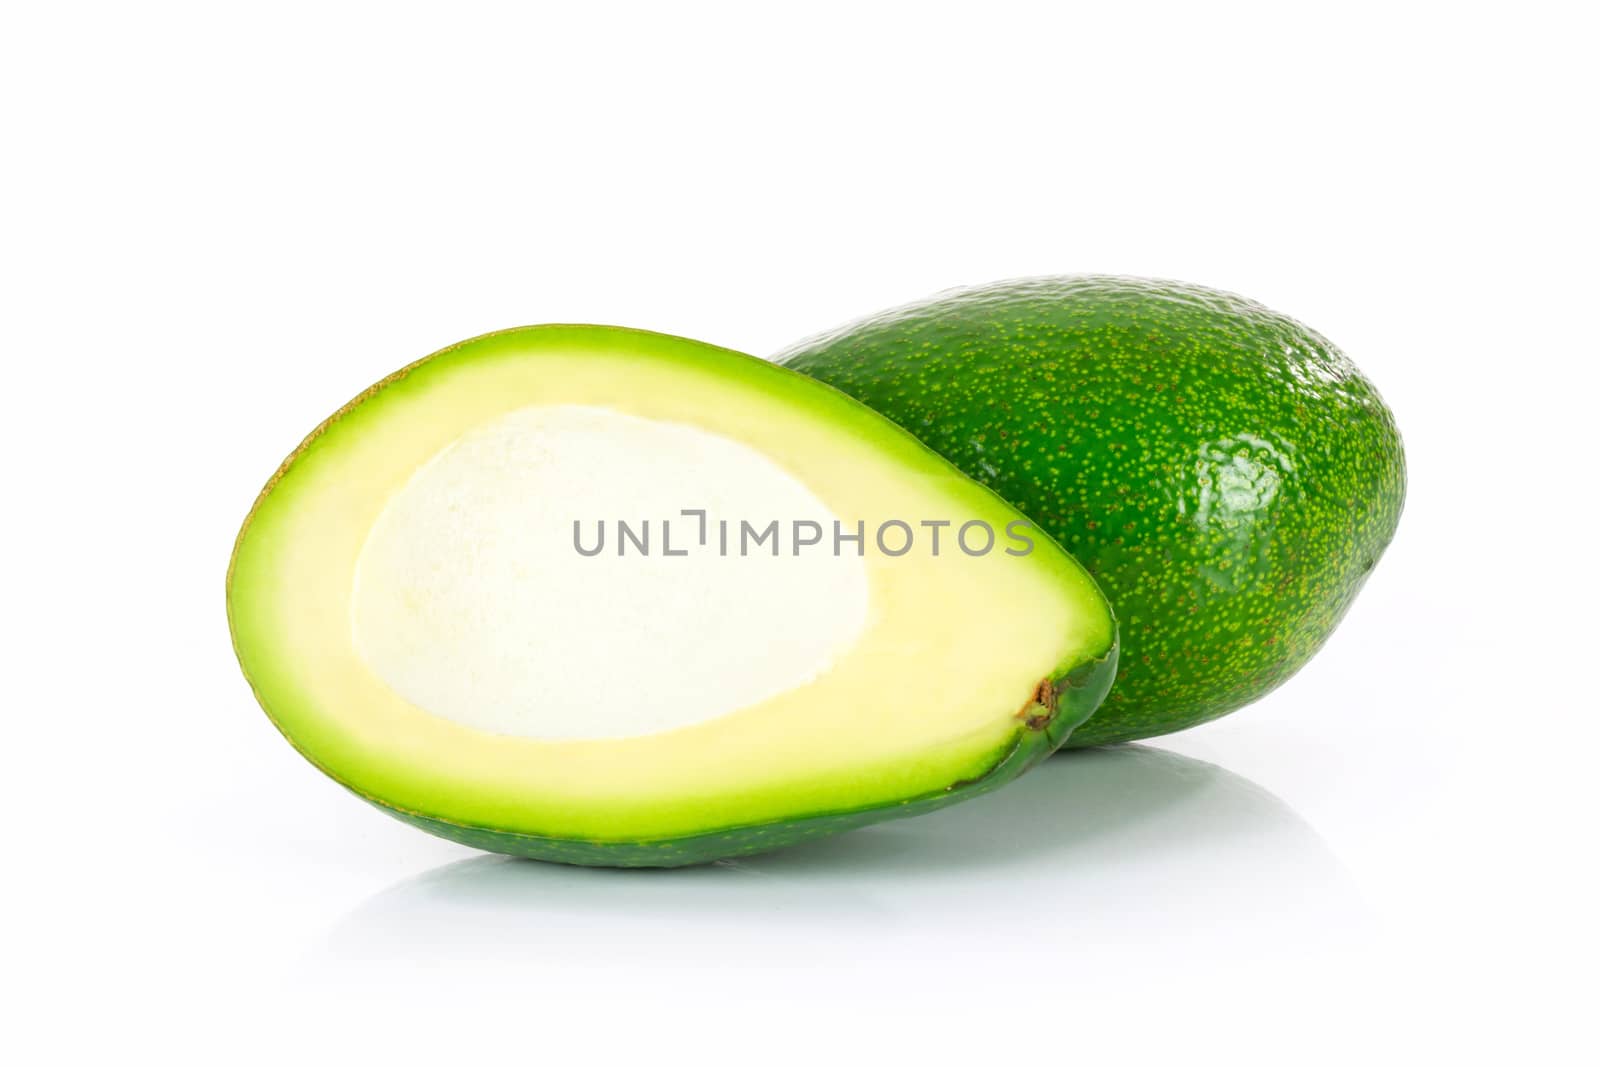 Slices of ripe avocado isolated on the white background